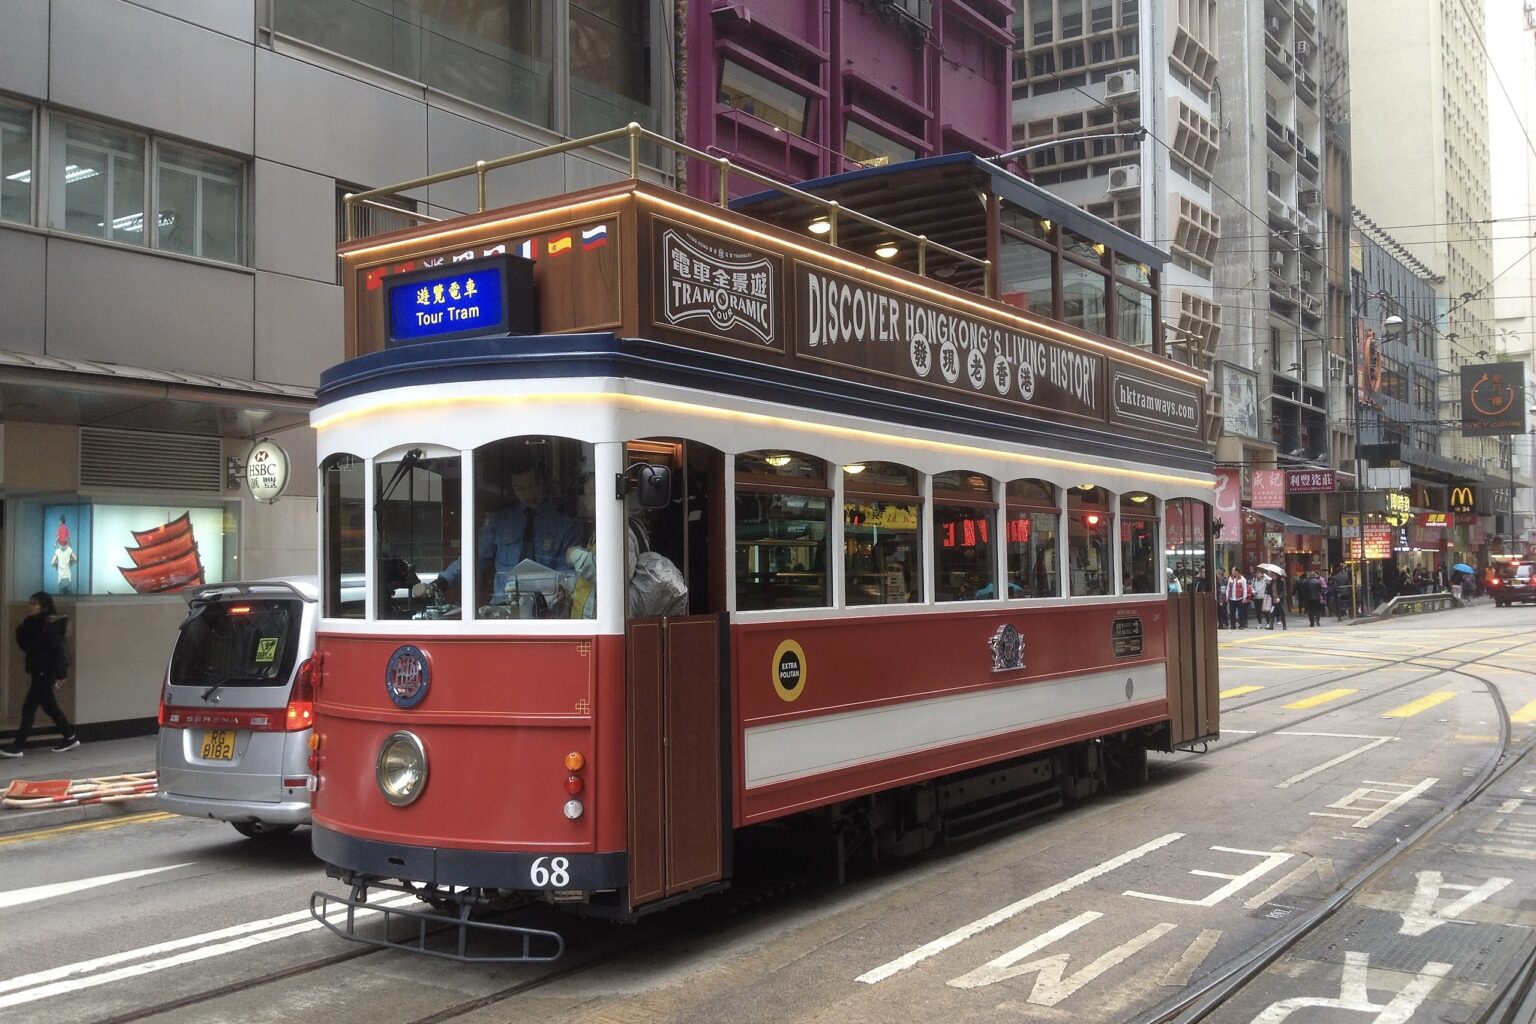 Hong Kong's Tram No. 68 on a trip through the CBD. It had a red body with a white trim and wooden accents.